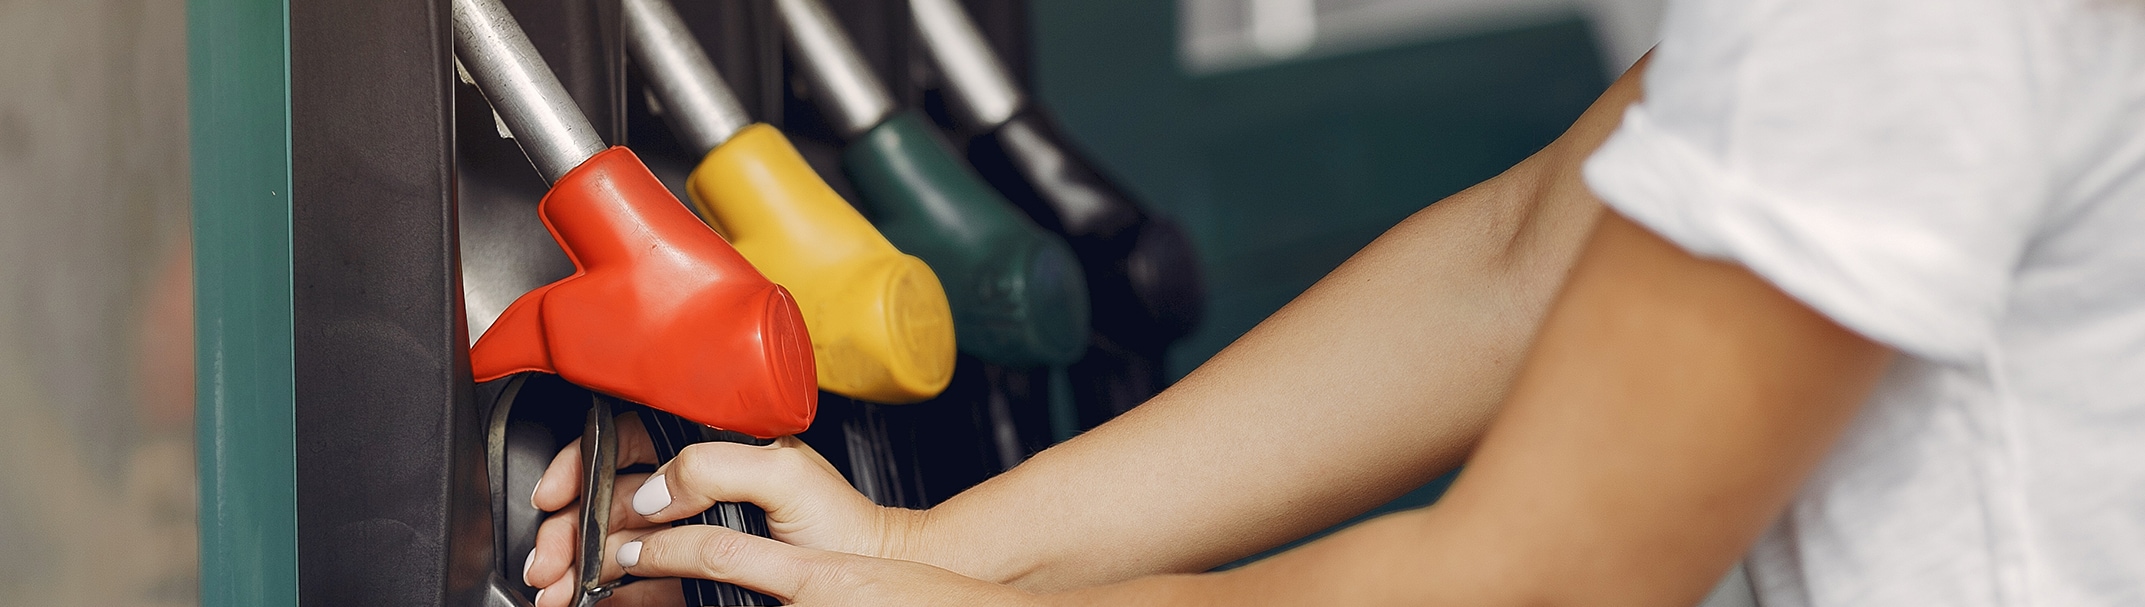 What Type of Gas is Best for My Car? | Bobby Rahal Toyota in Mechanicsburg, PA | Hand on gas red gas nozzle in front of gas stand